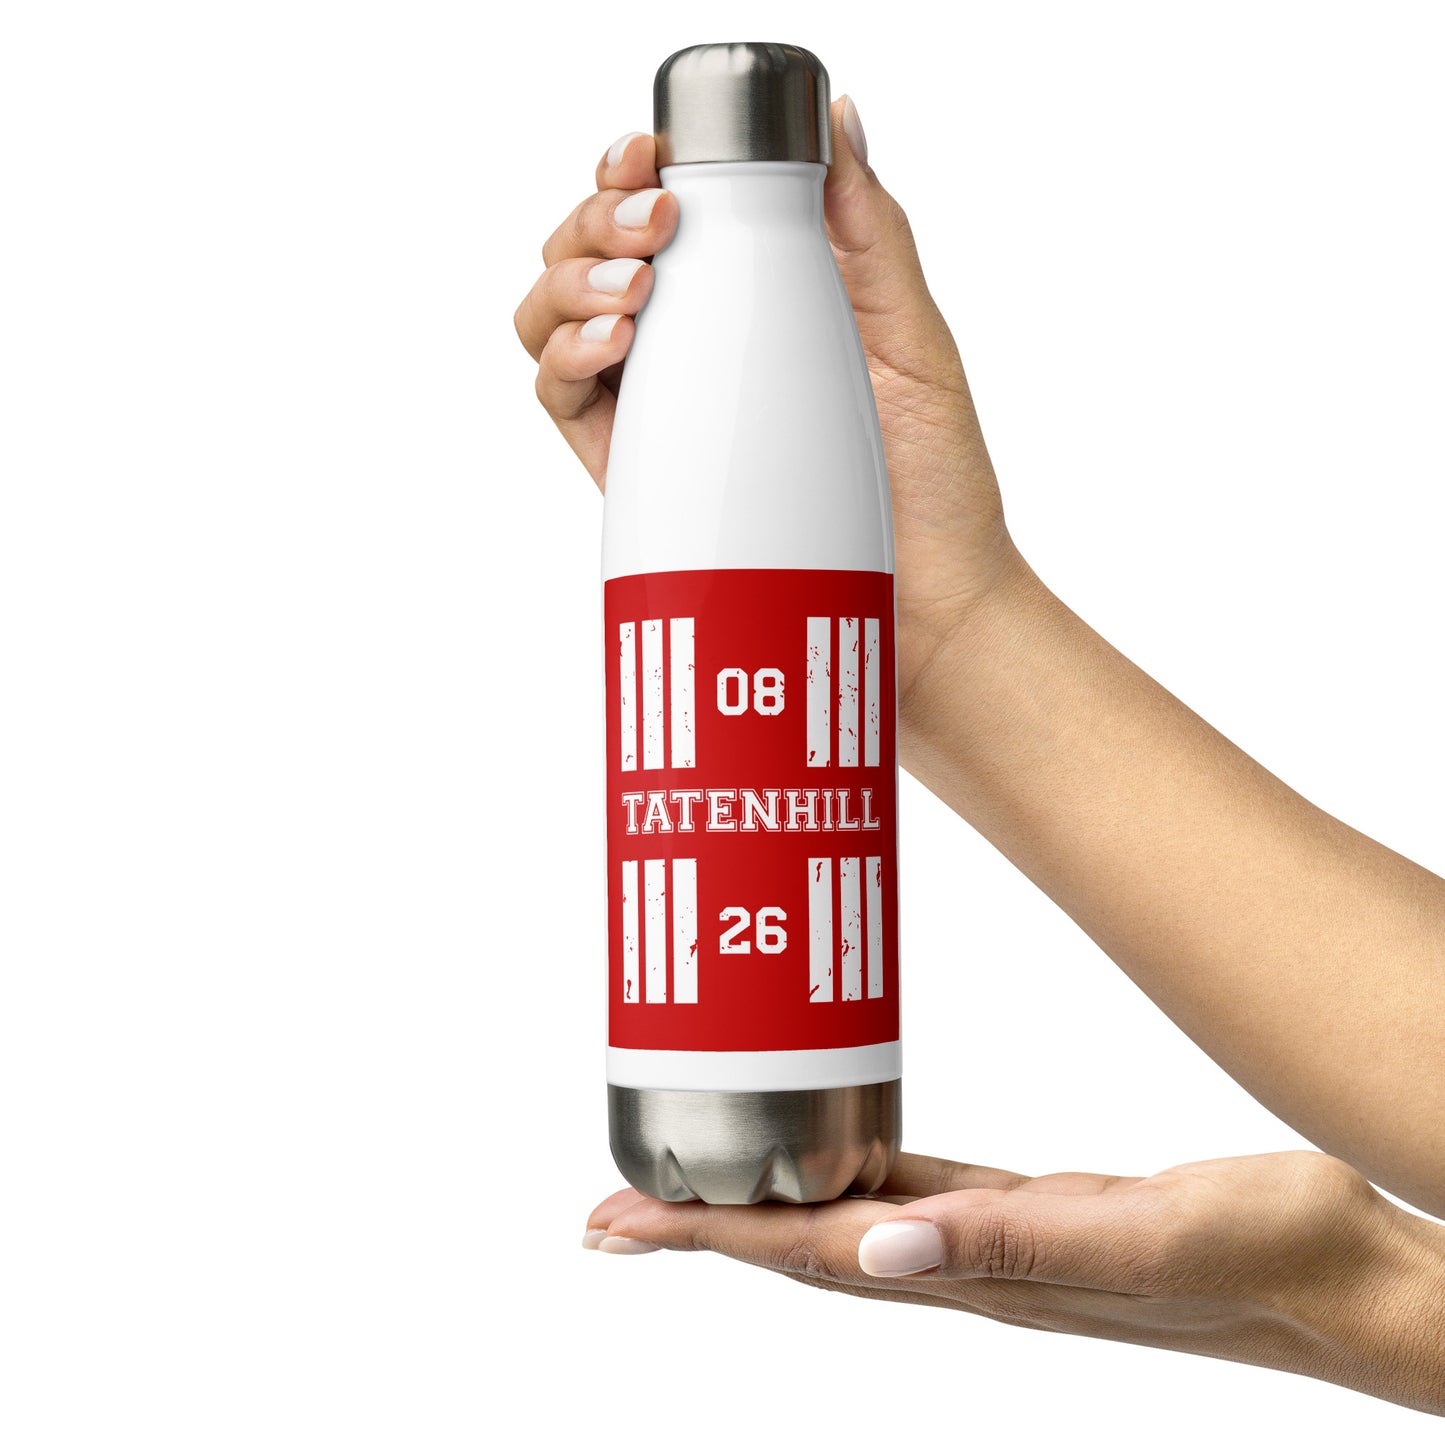 The Tatenhill Airfield runway designator water bottle features a red print with the airport's name and designator framed by stylised threshold markings showing through.